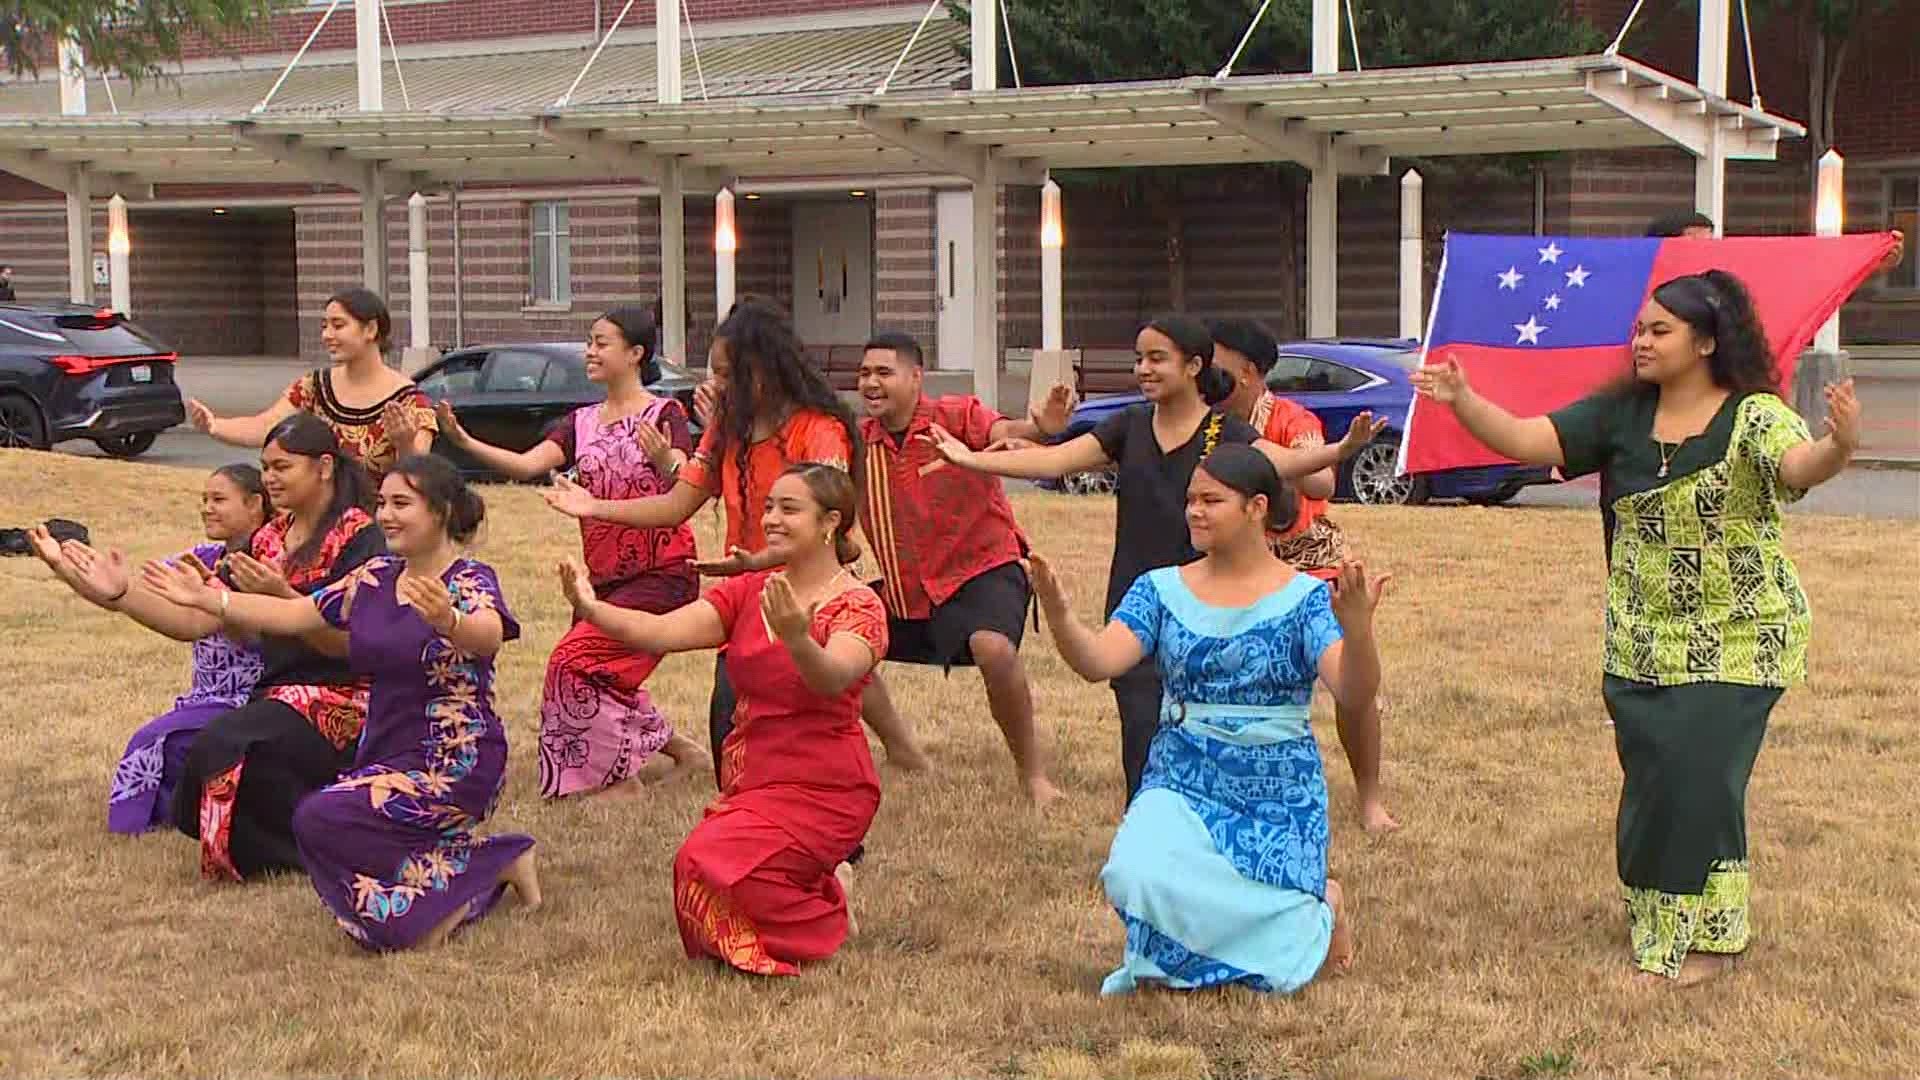 Tautua Pasifika Club greets students at Mount Tahoma High School as they return from summer break king5